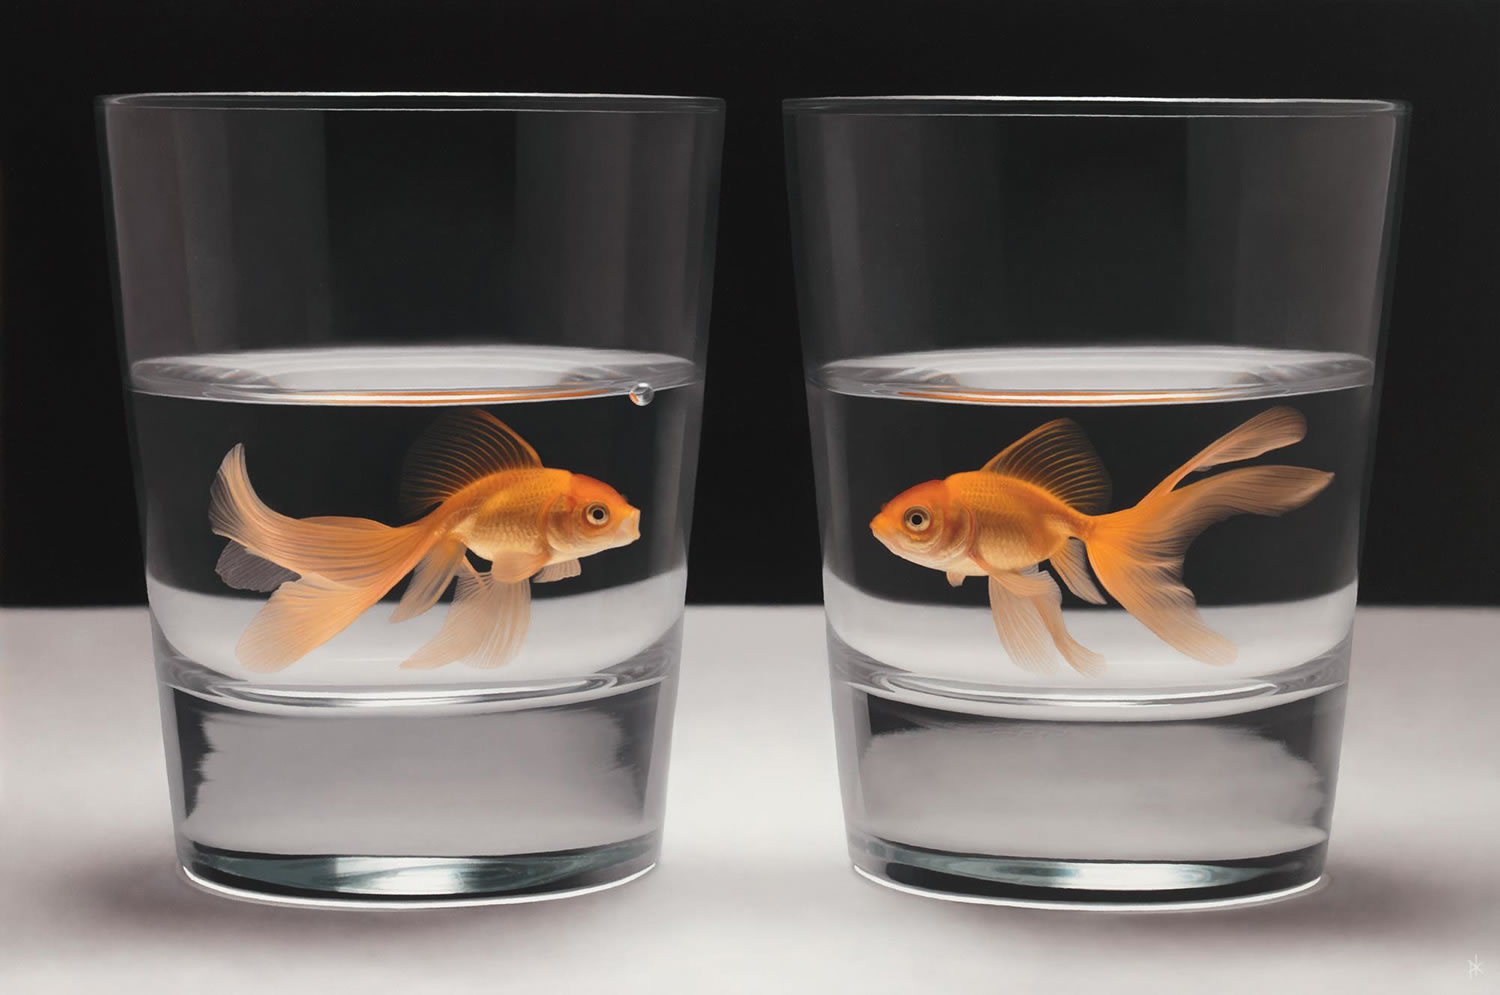 orange goldfishes in glass cups, painting by patrick kramer